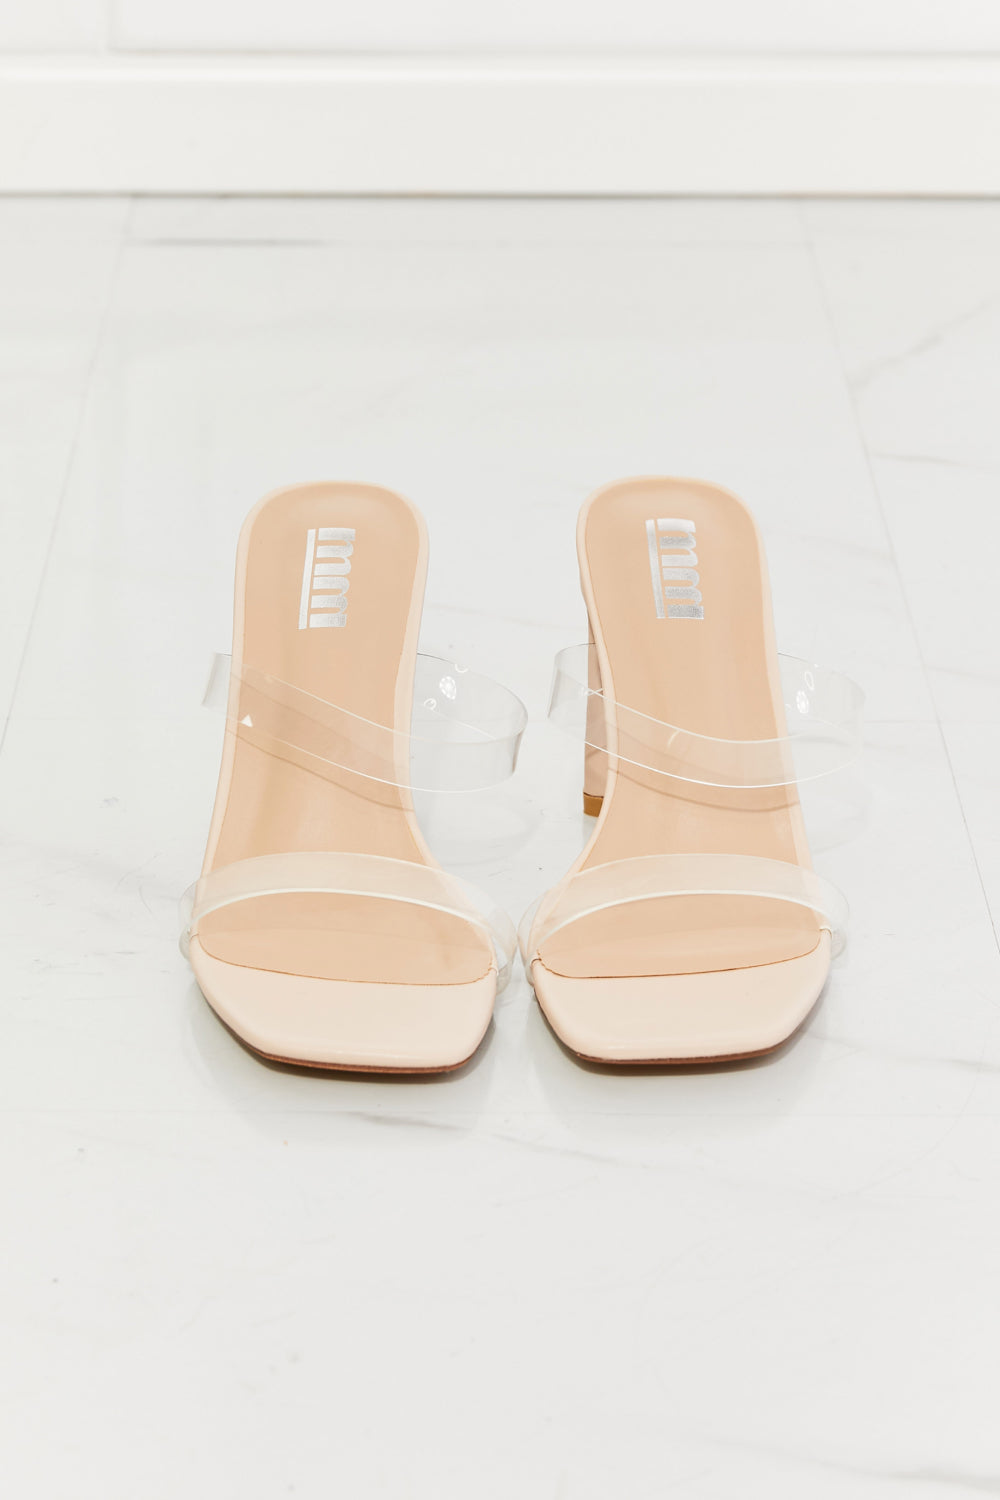 Walking On Air Transparent Double Band Heeled Sandal - Copper + Rose